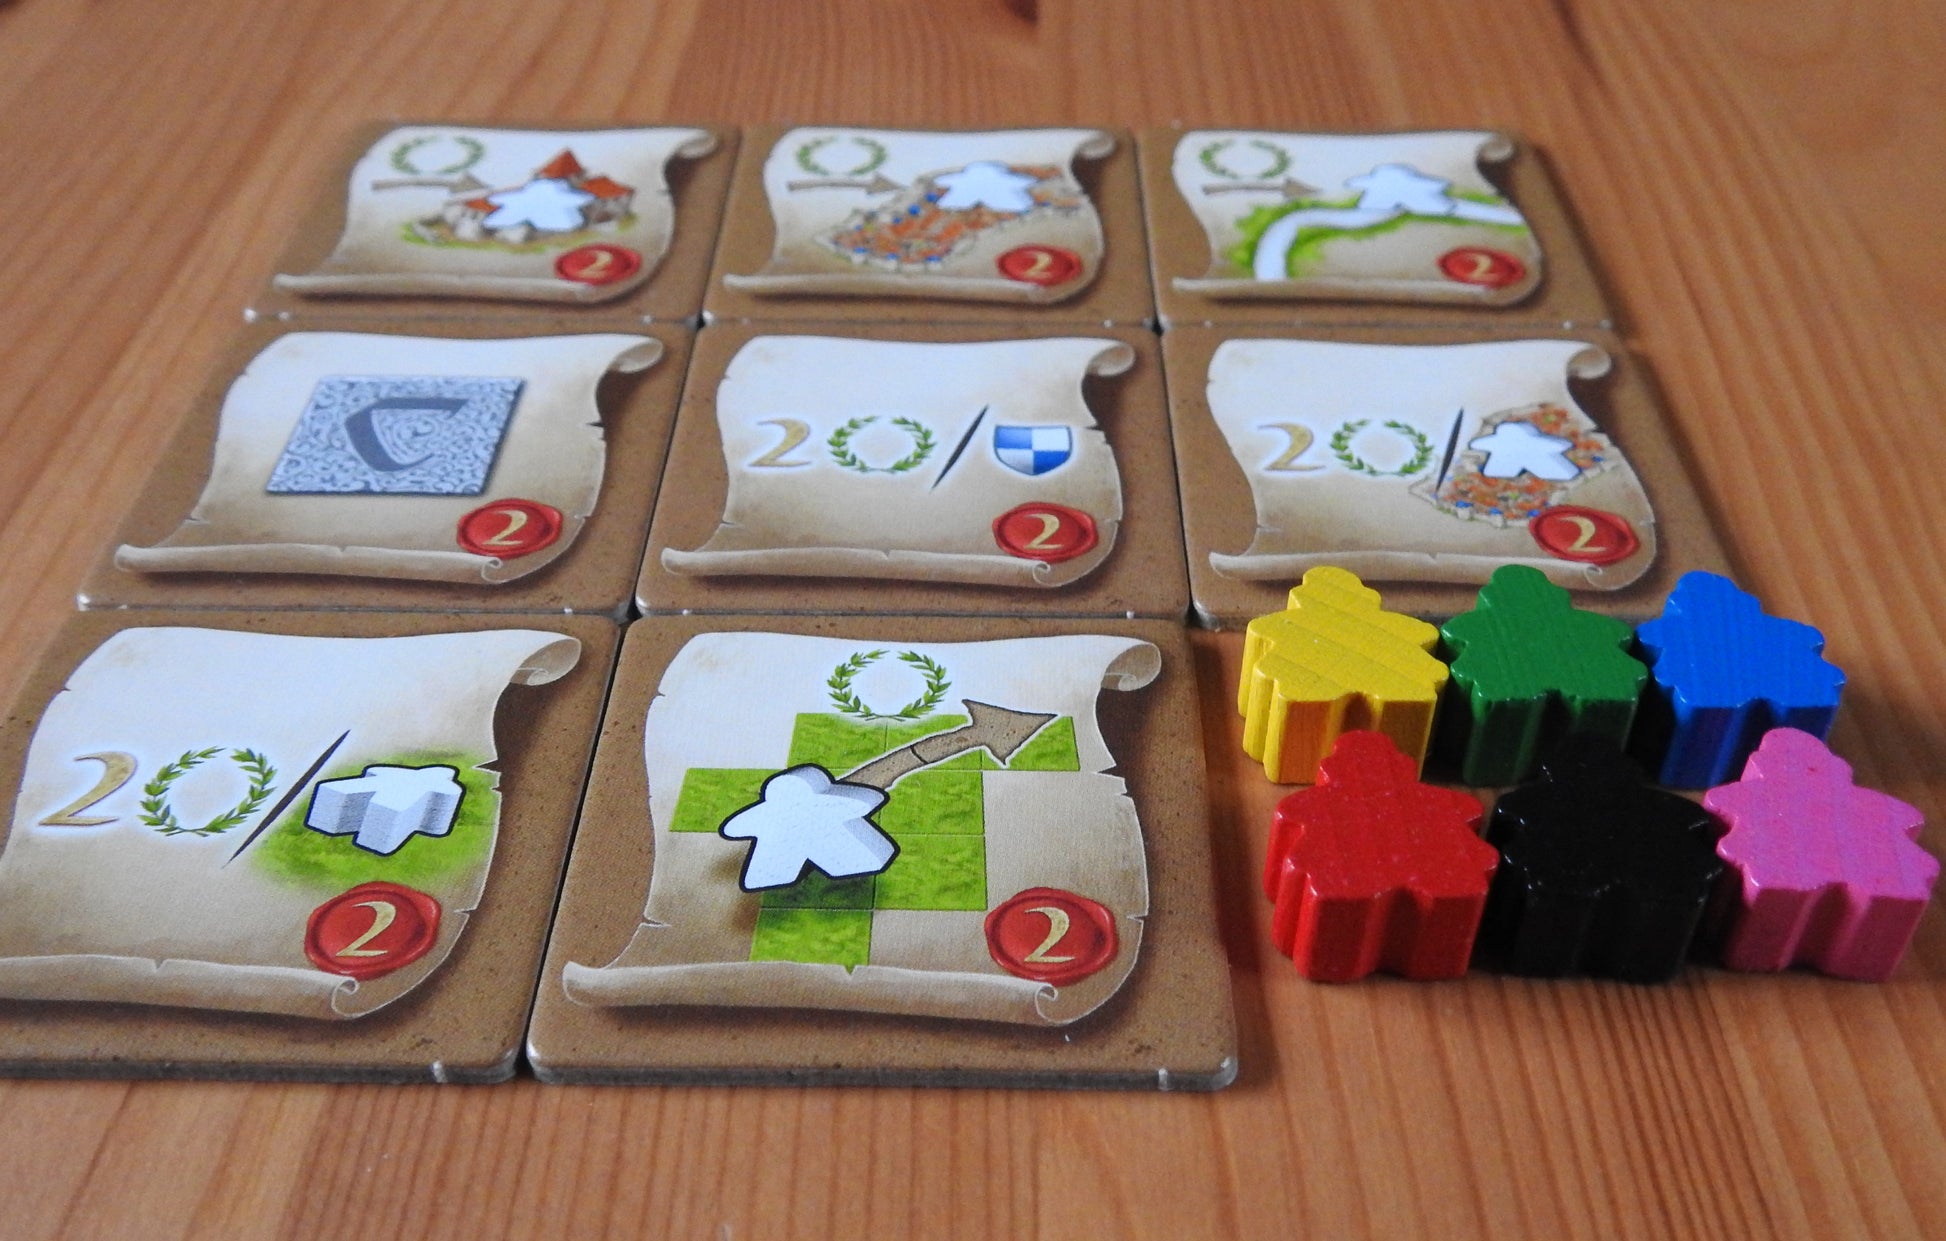 Close up of the tiles and the wooden mini messenger figures in their 6 colours: blue, green, black, red, yellow and pink.